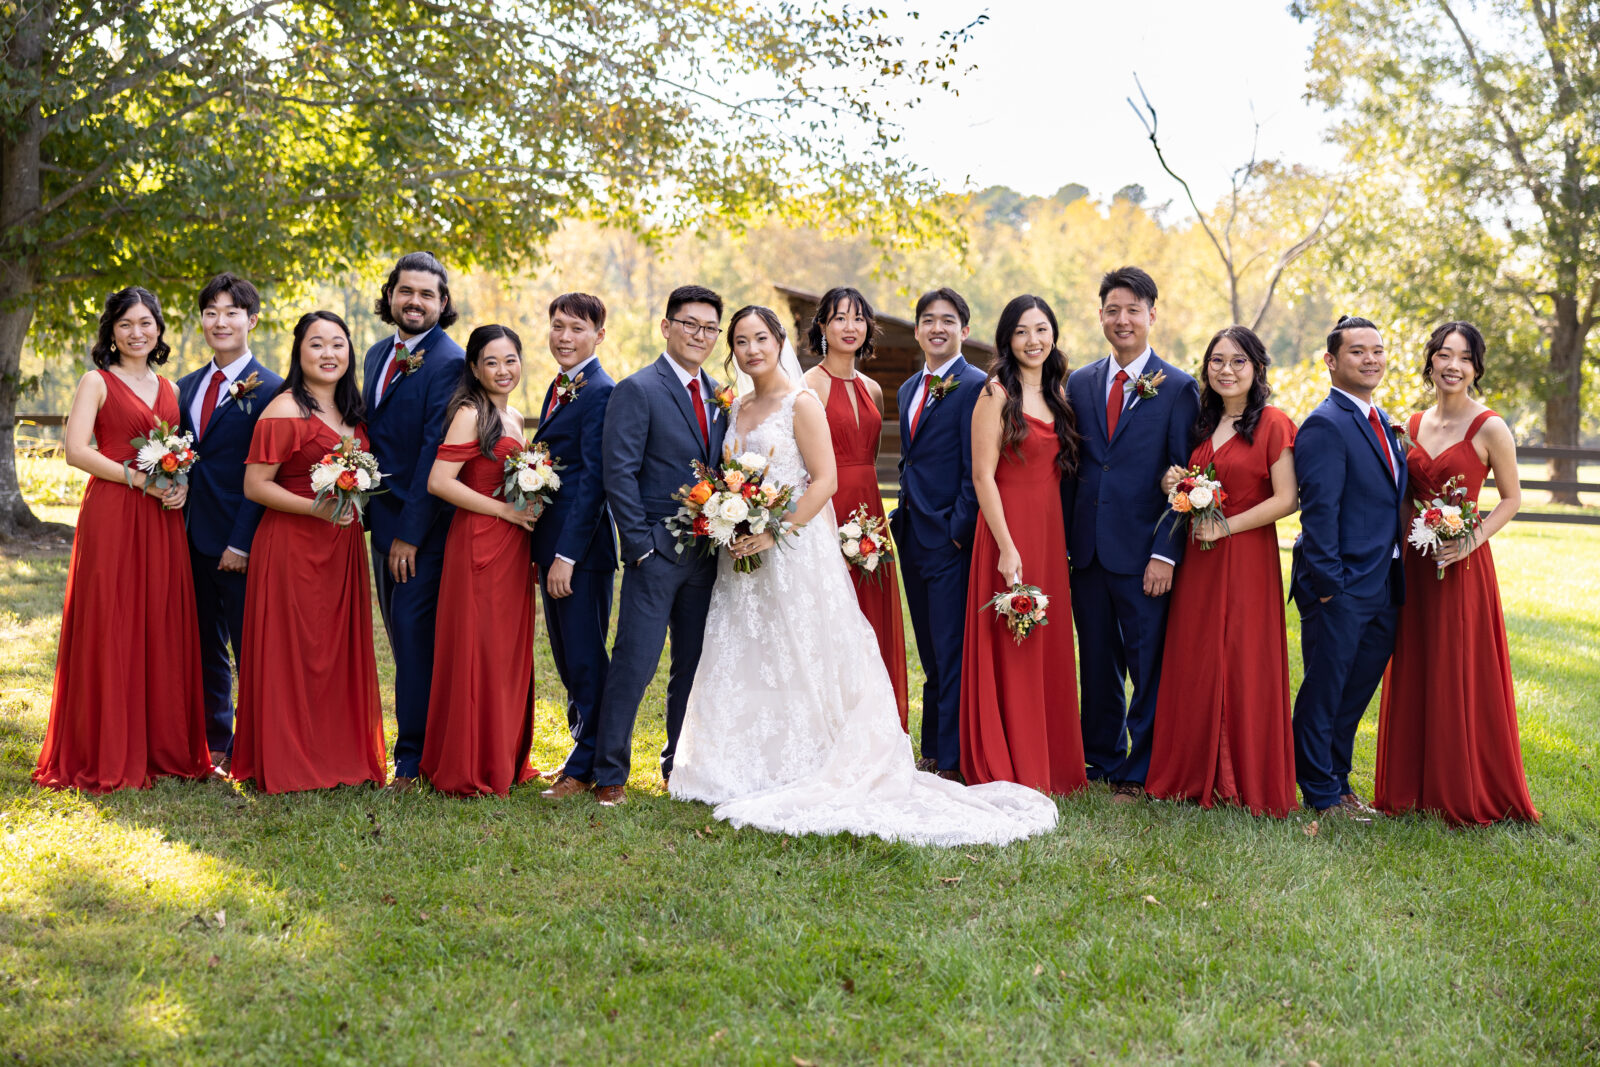 Large bridal party formal with red chiffon bridesmaid dresses and royal blue tuxes for groomsmen on the lawn of an estate.  Bride wearing a lace detailed sweetheart neckline dress with an eclectic bouquet of fall flowers